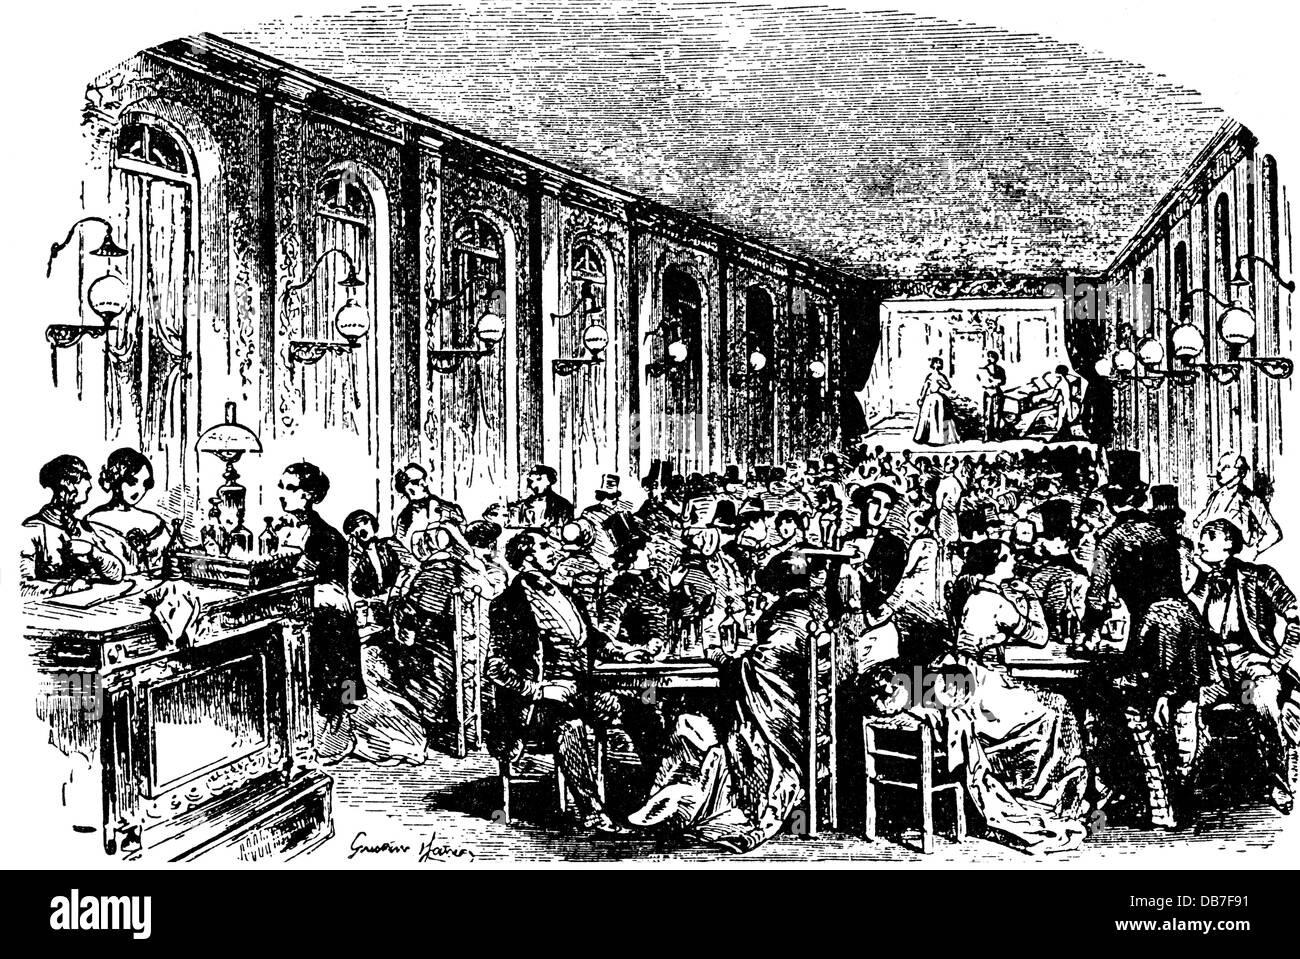 gastronomy, cafes / street cafes, Cafe chantant, Passage Jouffroy, Paris, wood engraving, 1852, Additional-Rights-Clearences-Not Available Stock Photo